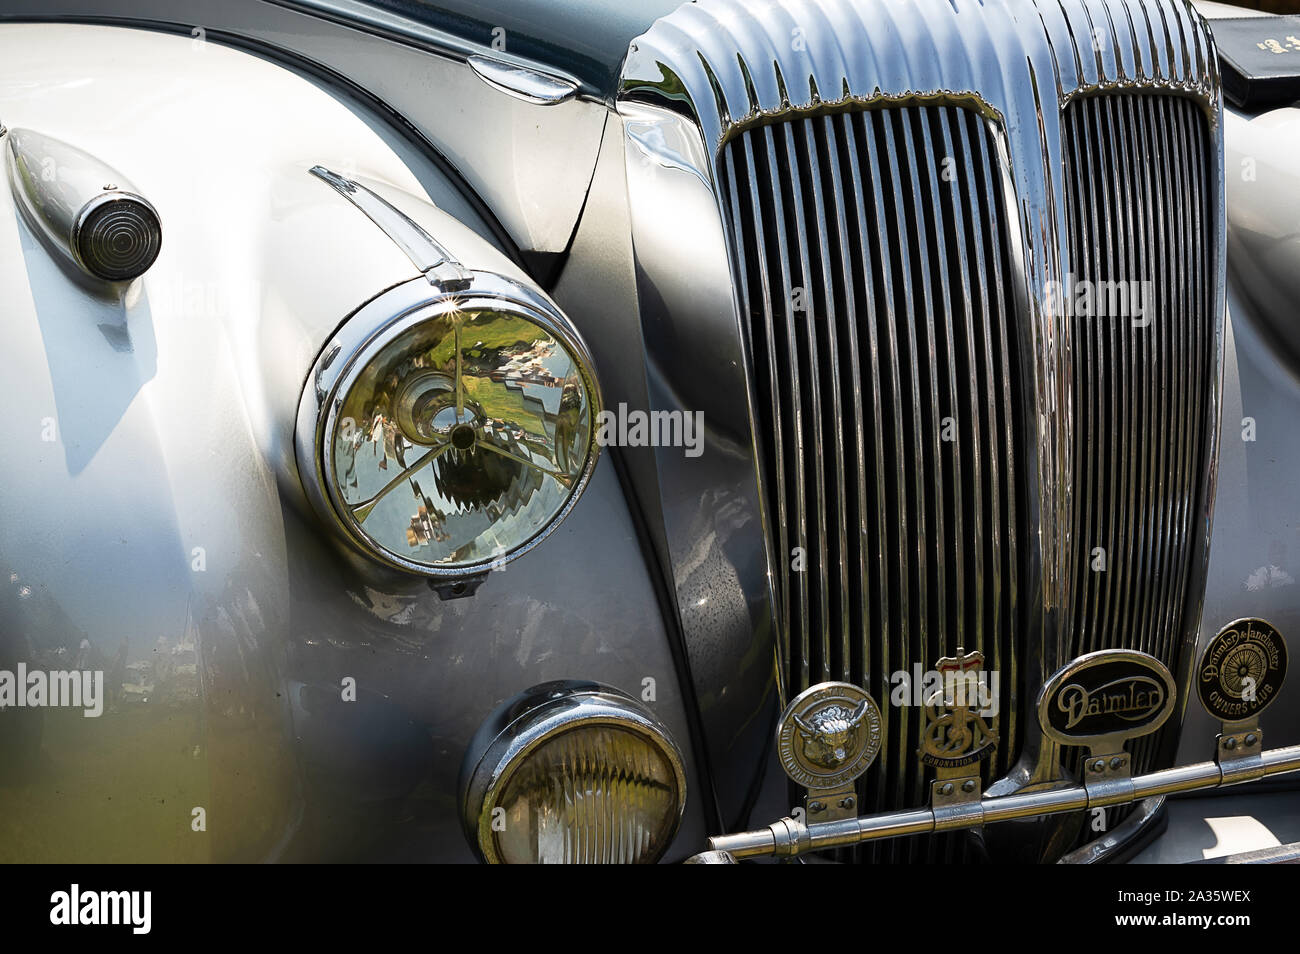 The front of a 1952 Daimler DB18 Consort on display at a car show Stock Photo